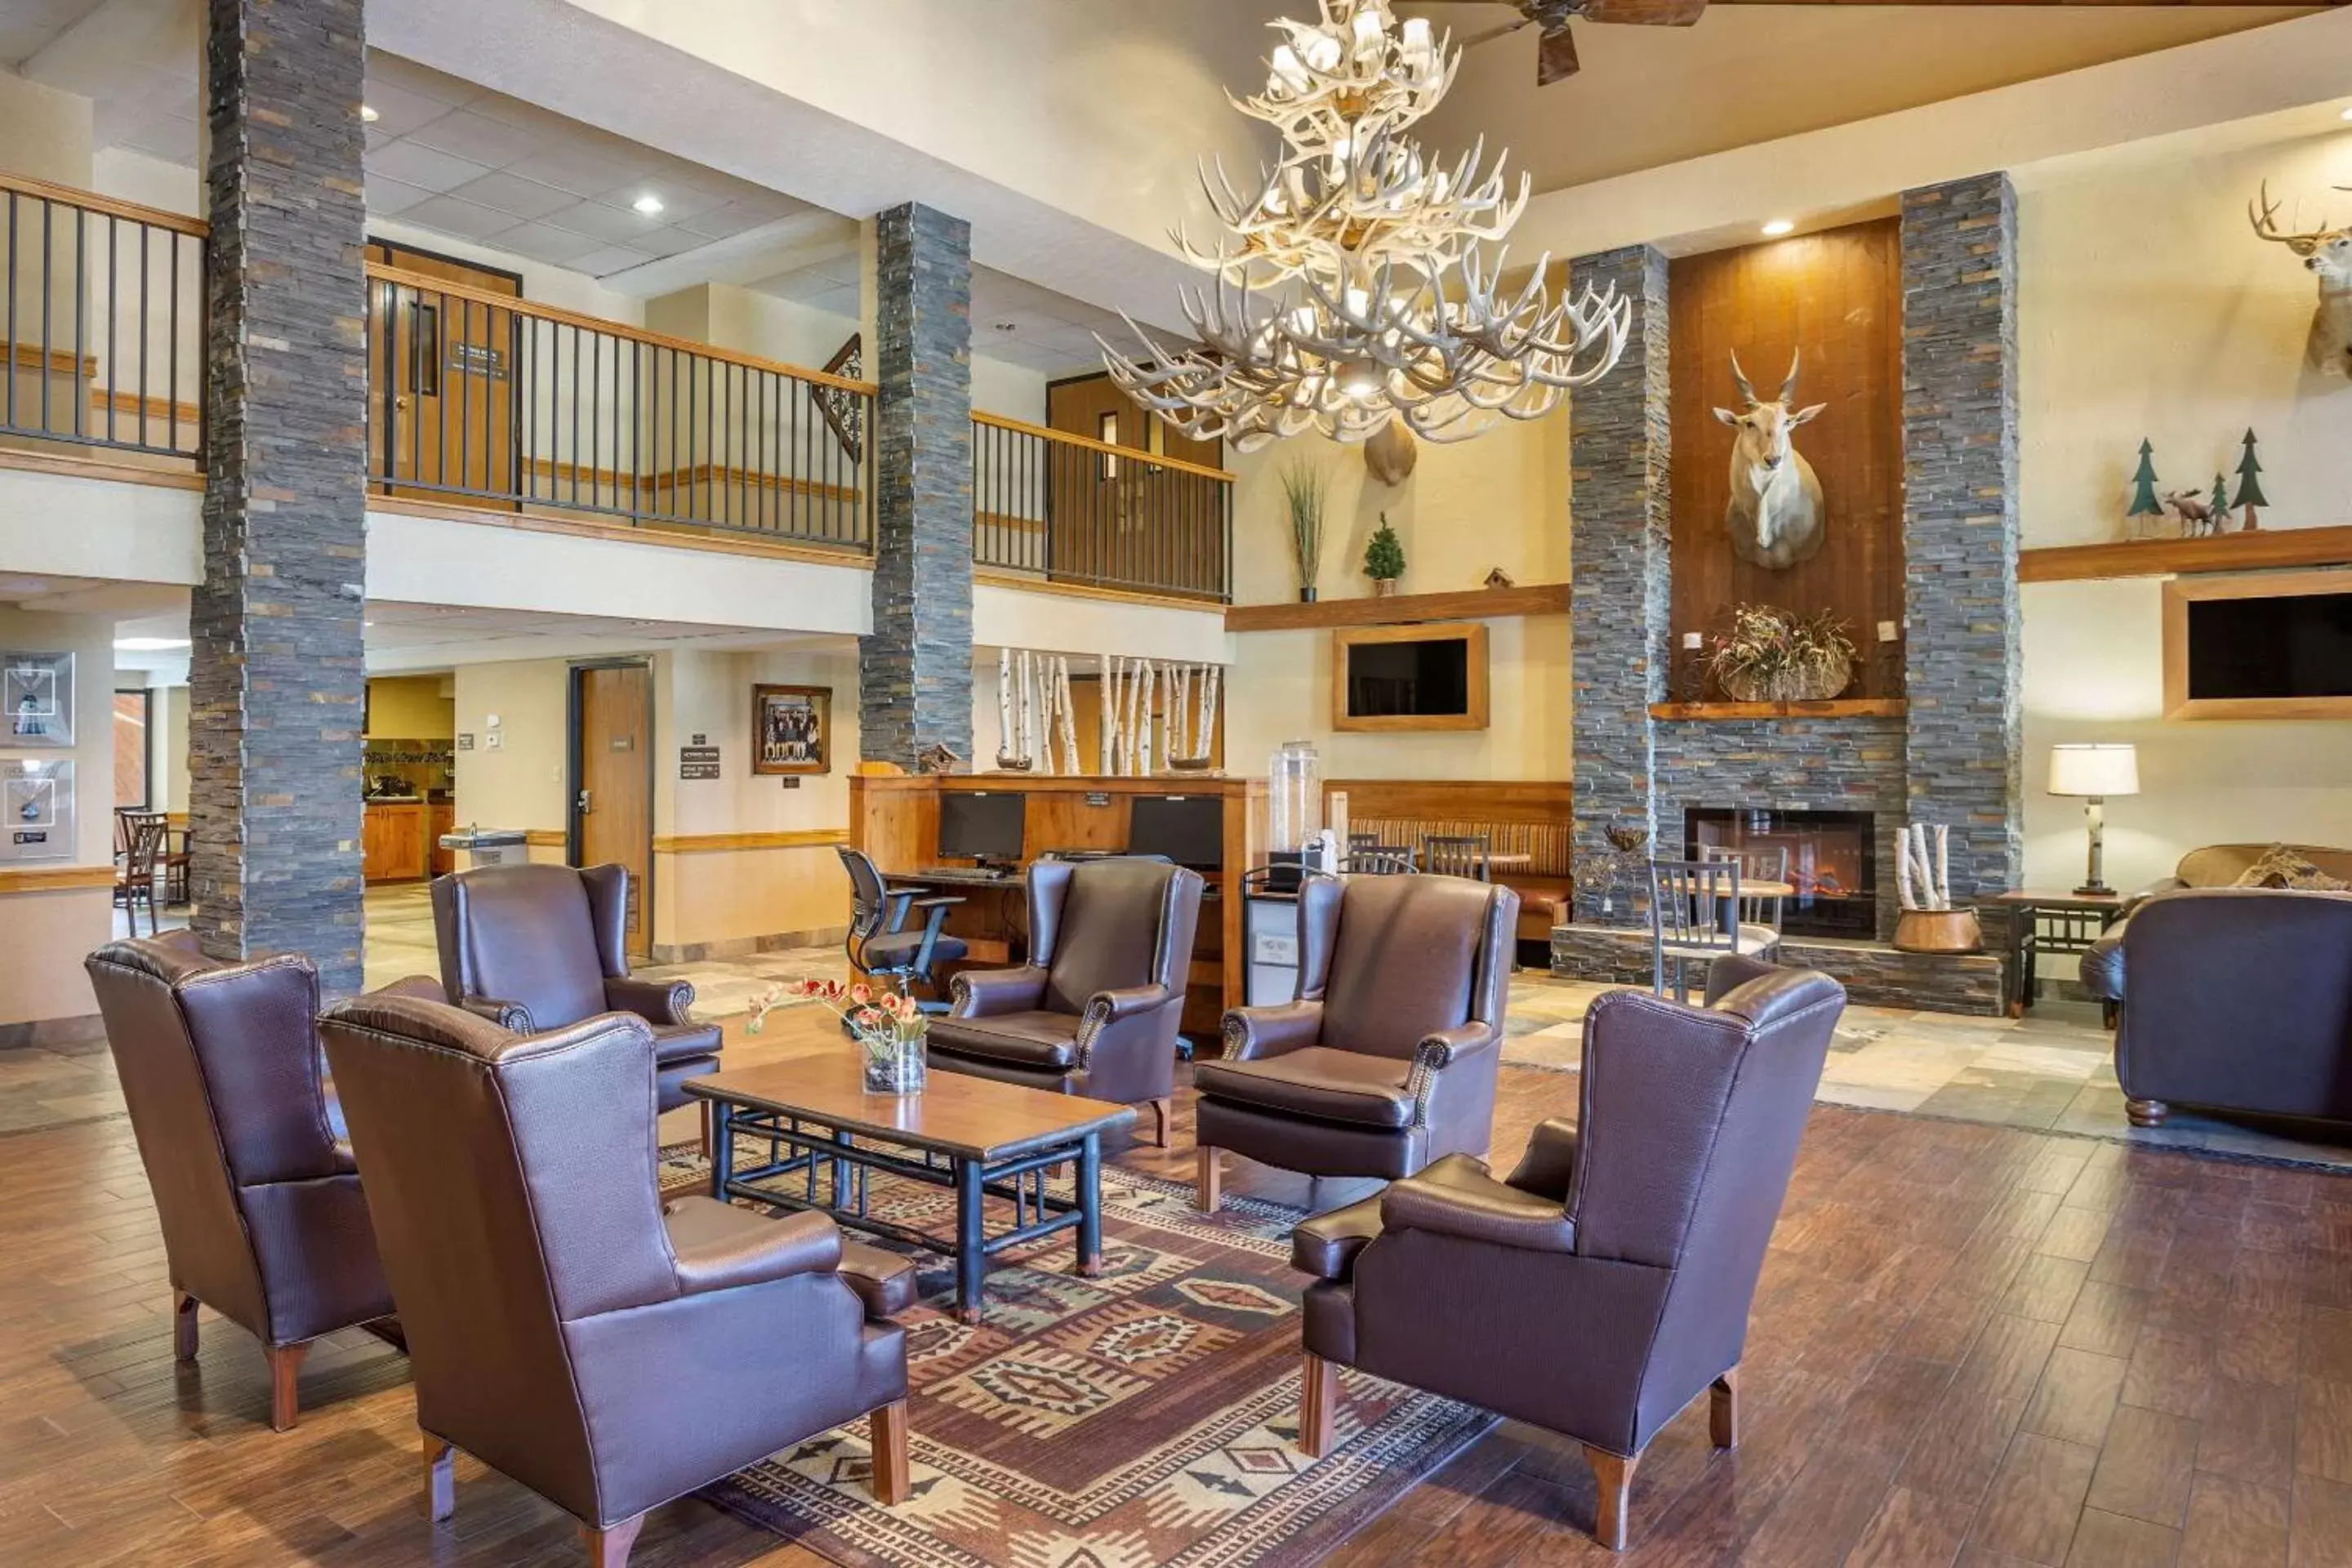 Lobby or reception in Comfort Inn at Thousand Hills